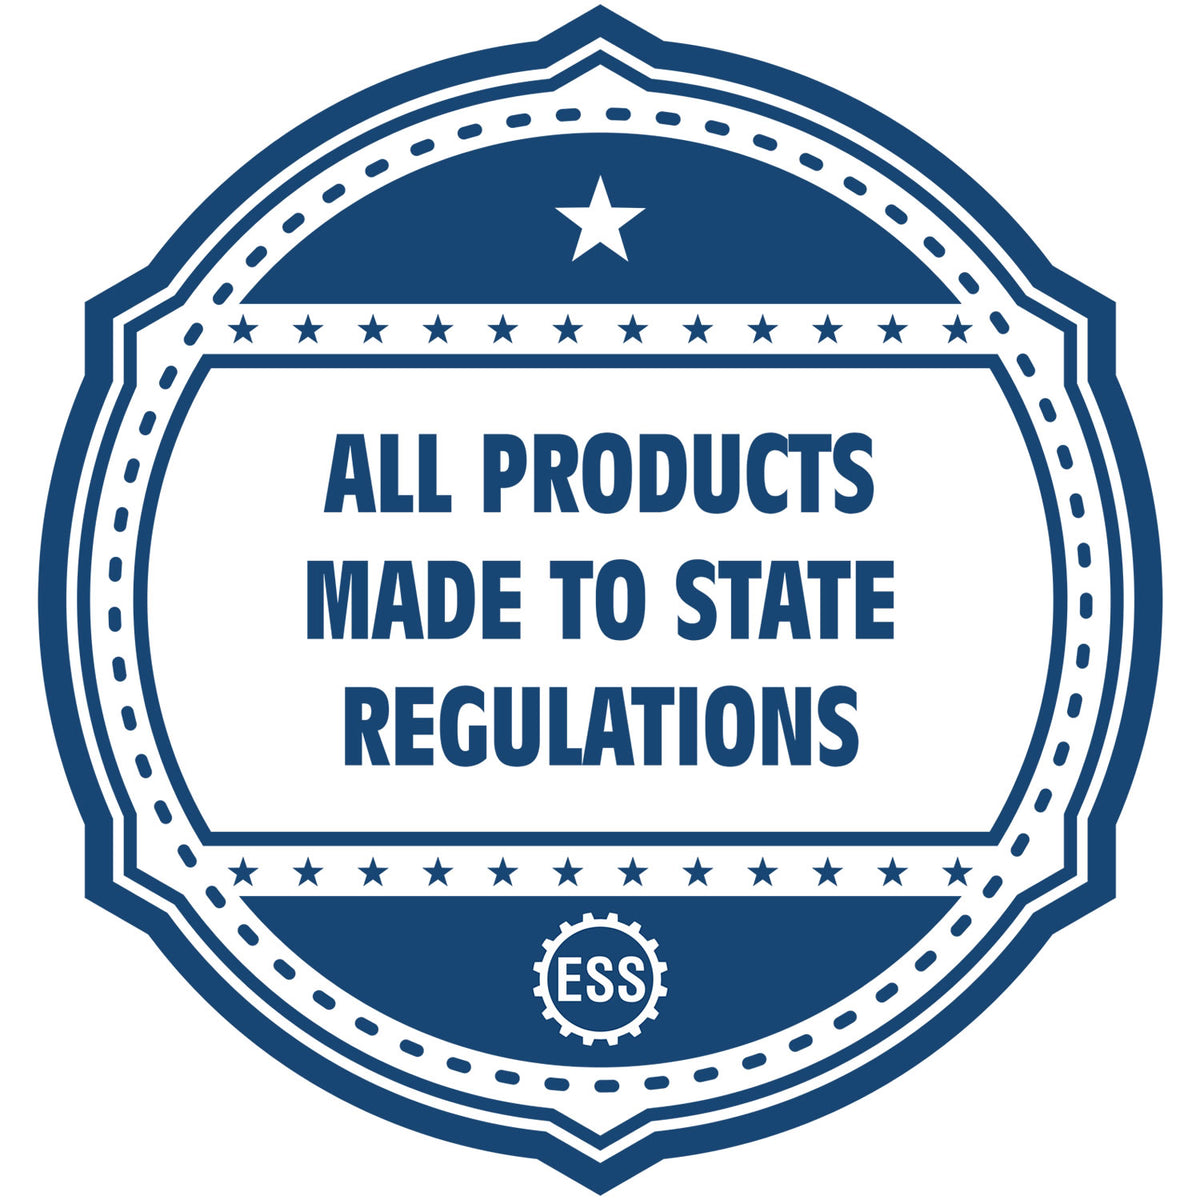 A blue icon or badge for the State of Illinois Extended Long Reach Geologist Seal showing that this product is made in compliance with state regulations.